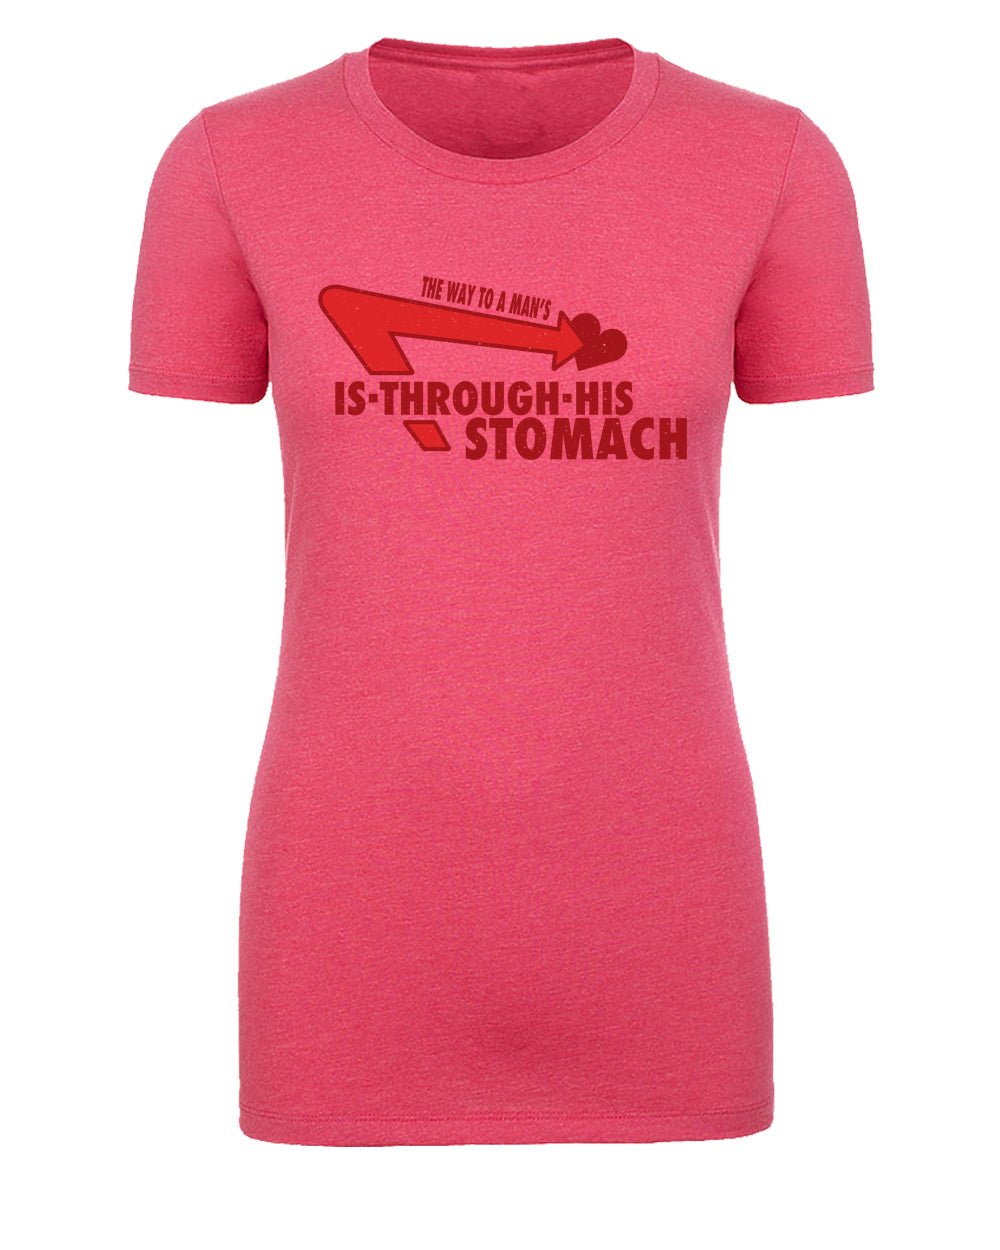 The Way to a Man's Heart Is Through His Stomach (Quick Burger) Womens T Shirts - Mato & Hash